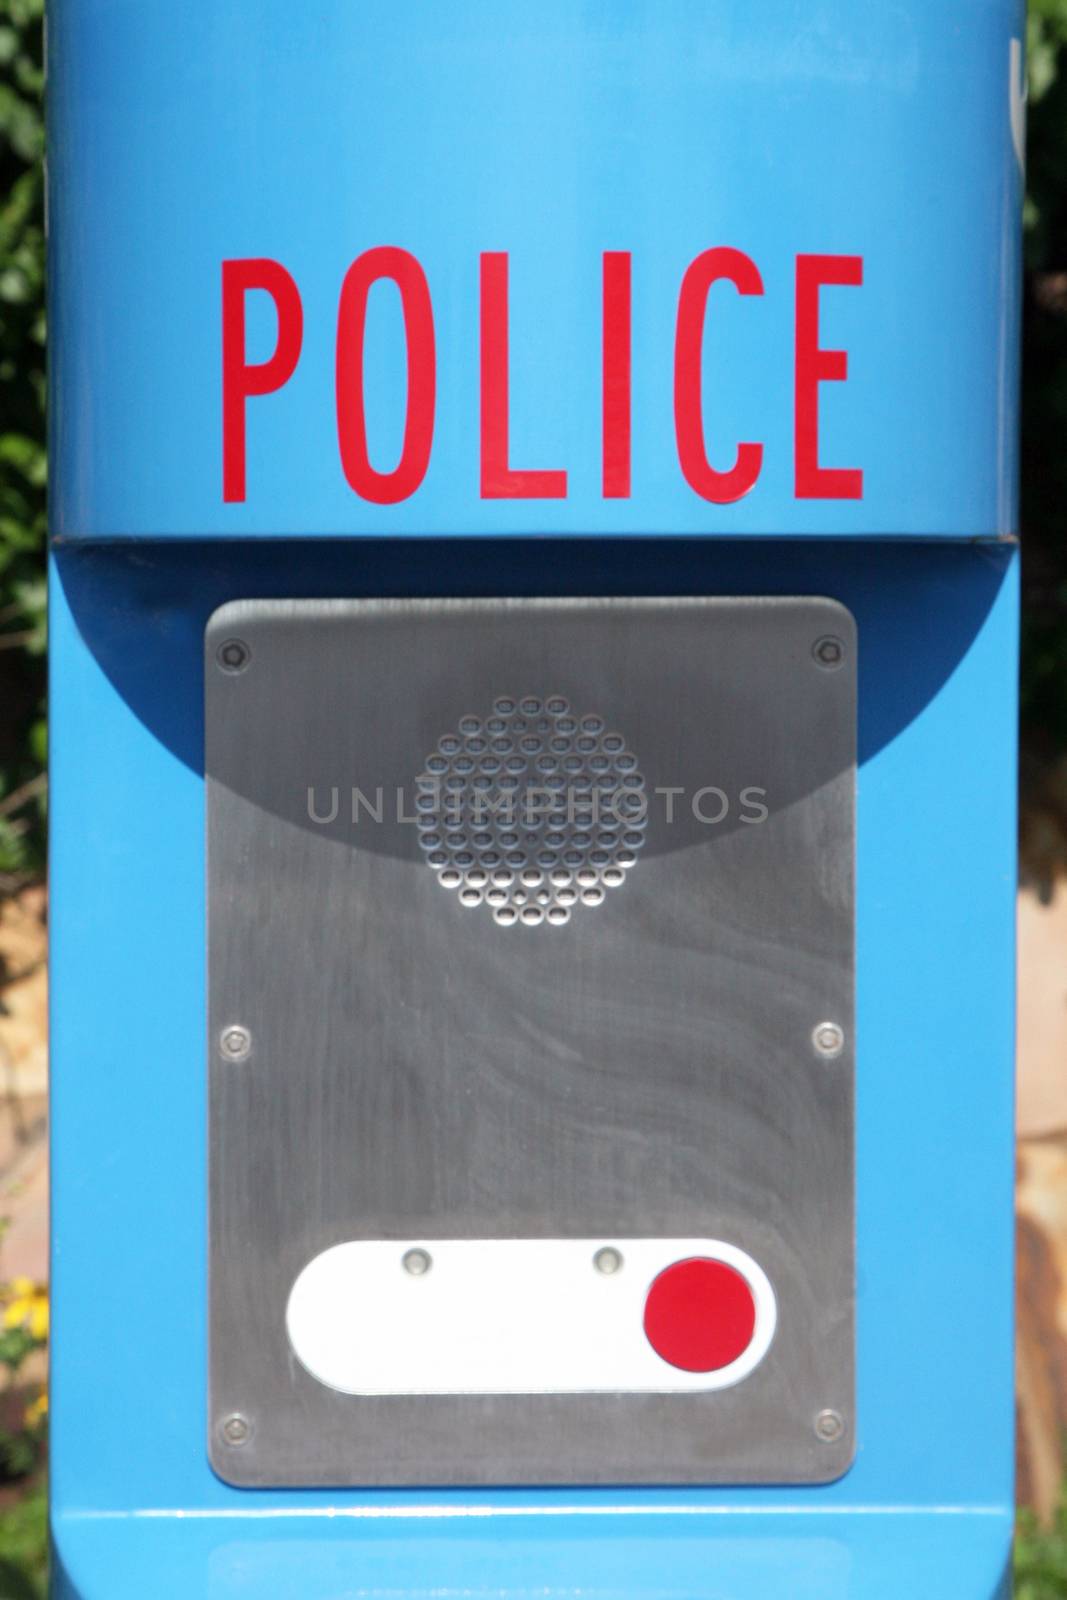 Police or emergency call box to summon help.